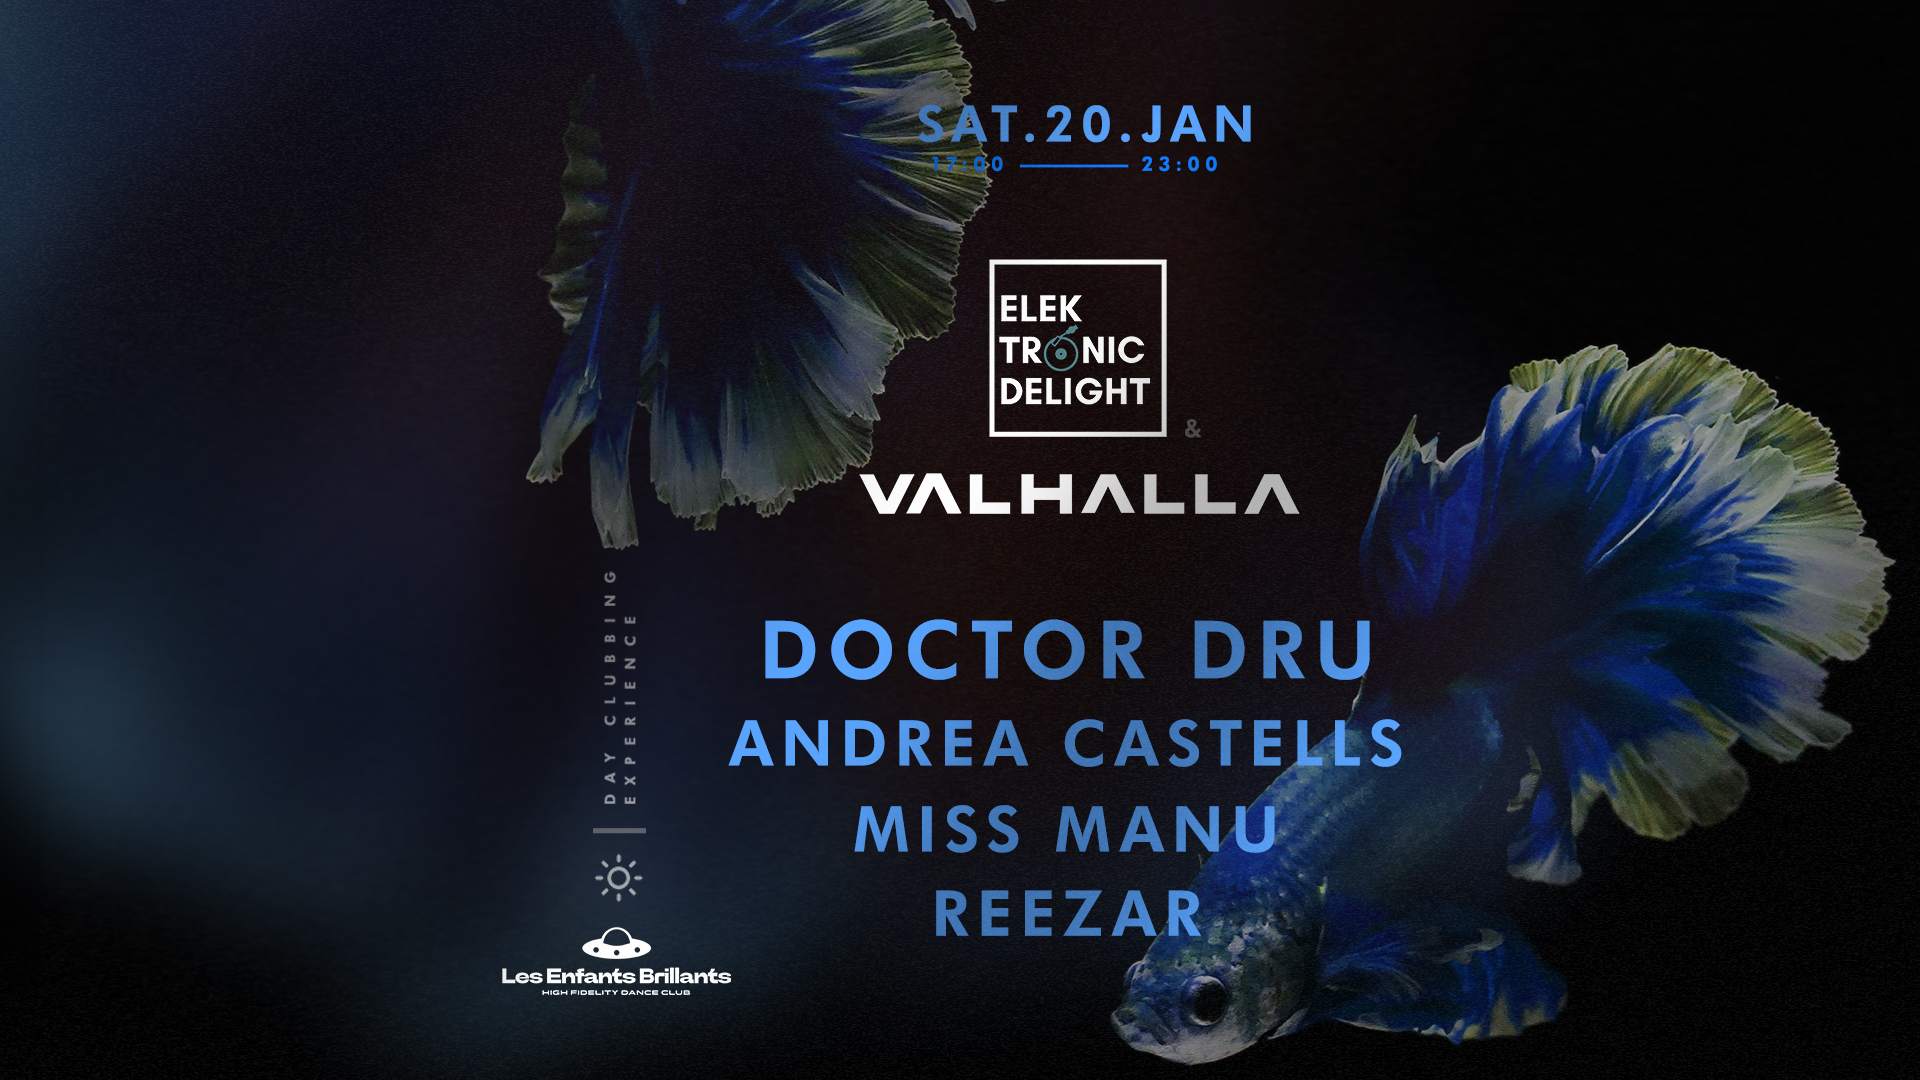 Elektronic Delight & Valhalla with Doctor Dru (Day Event) - フライヤー表